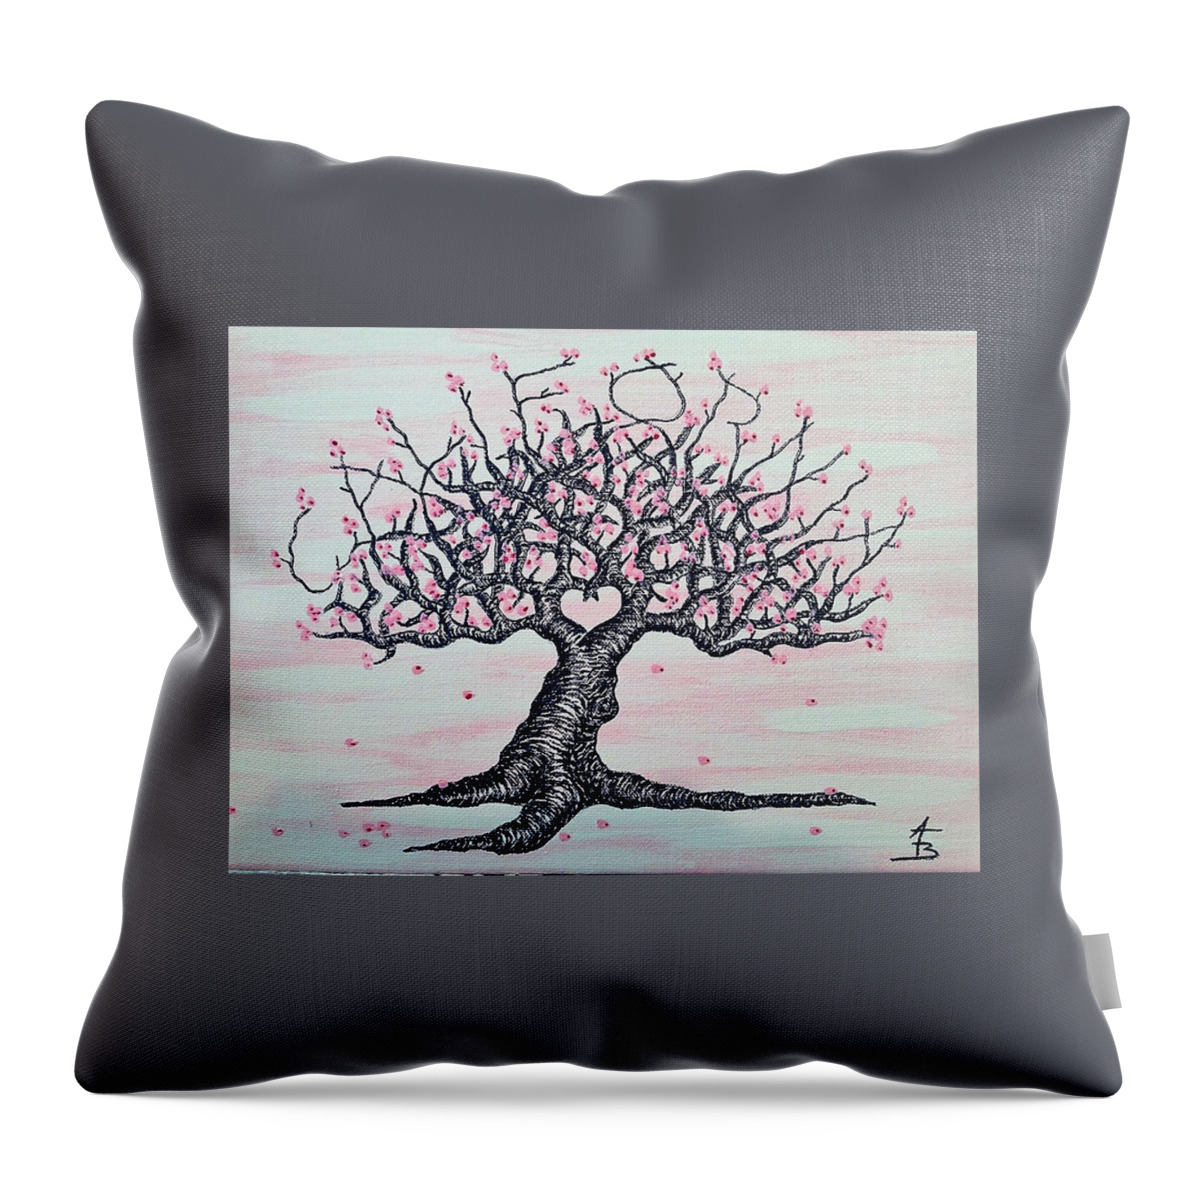 California Throw Pillow featuring the drawing California Cherry Blossom Love Tree by Aaron Bombalicki